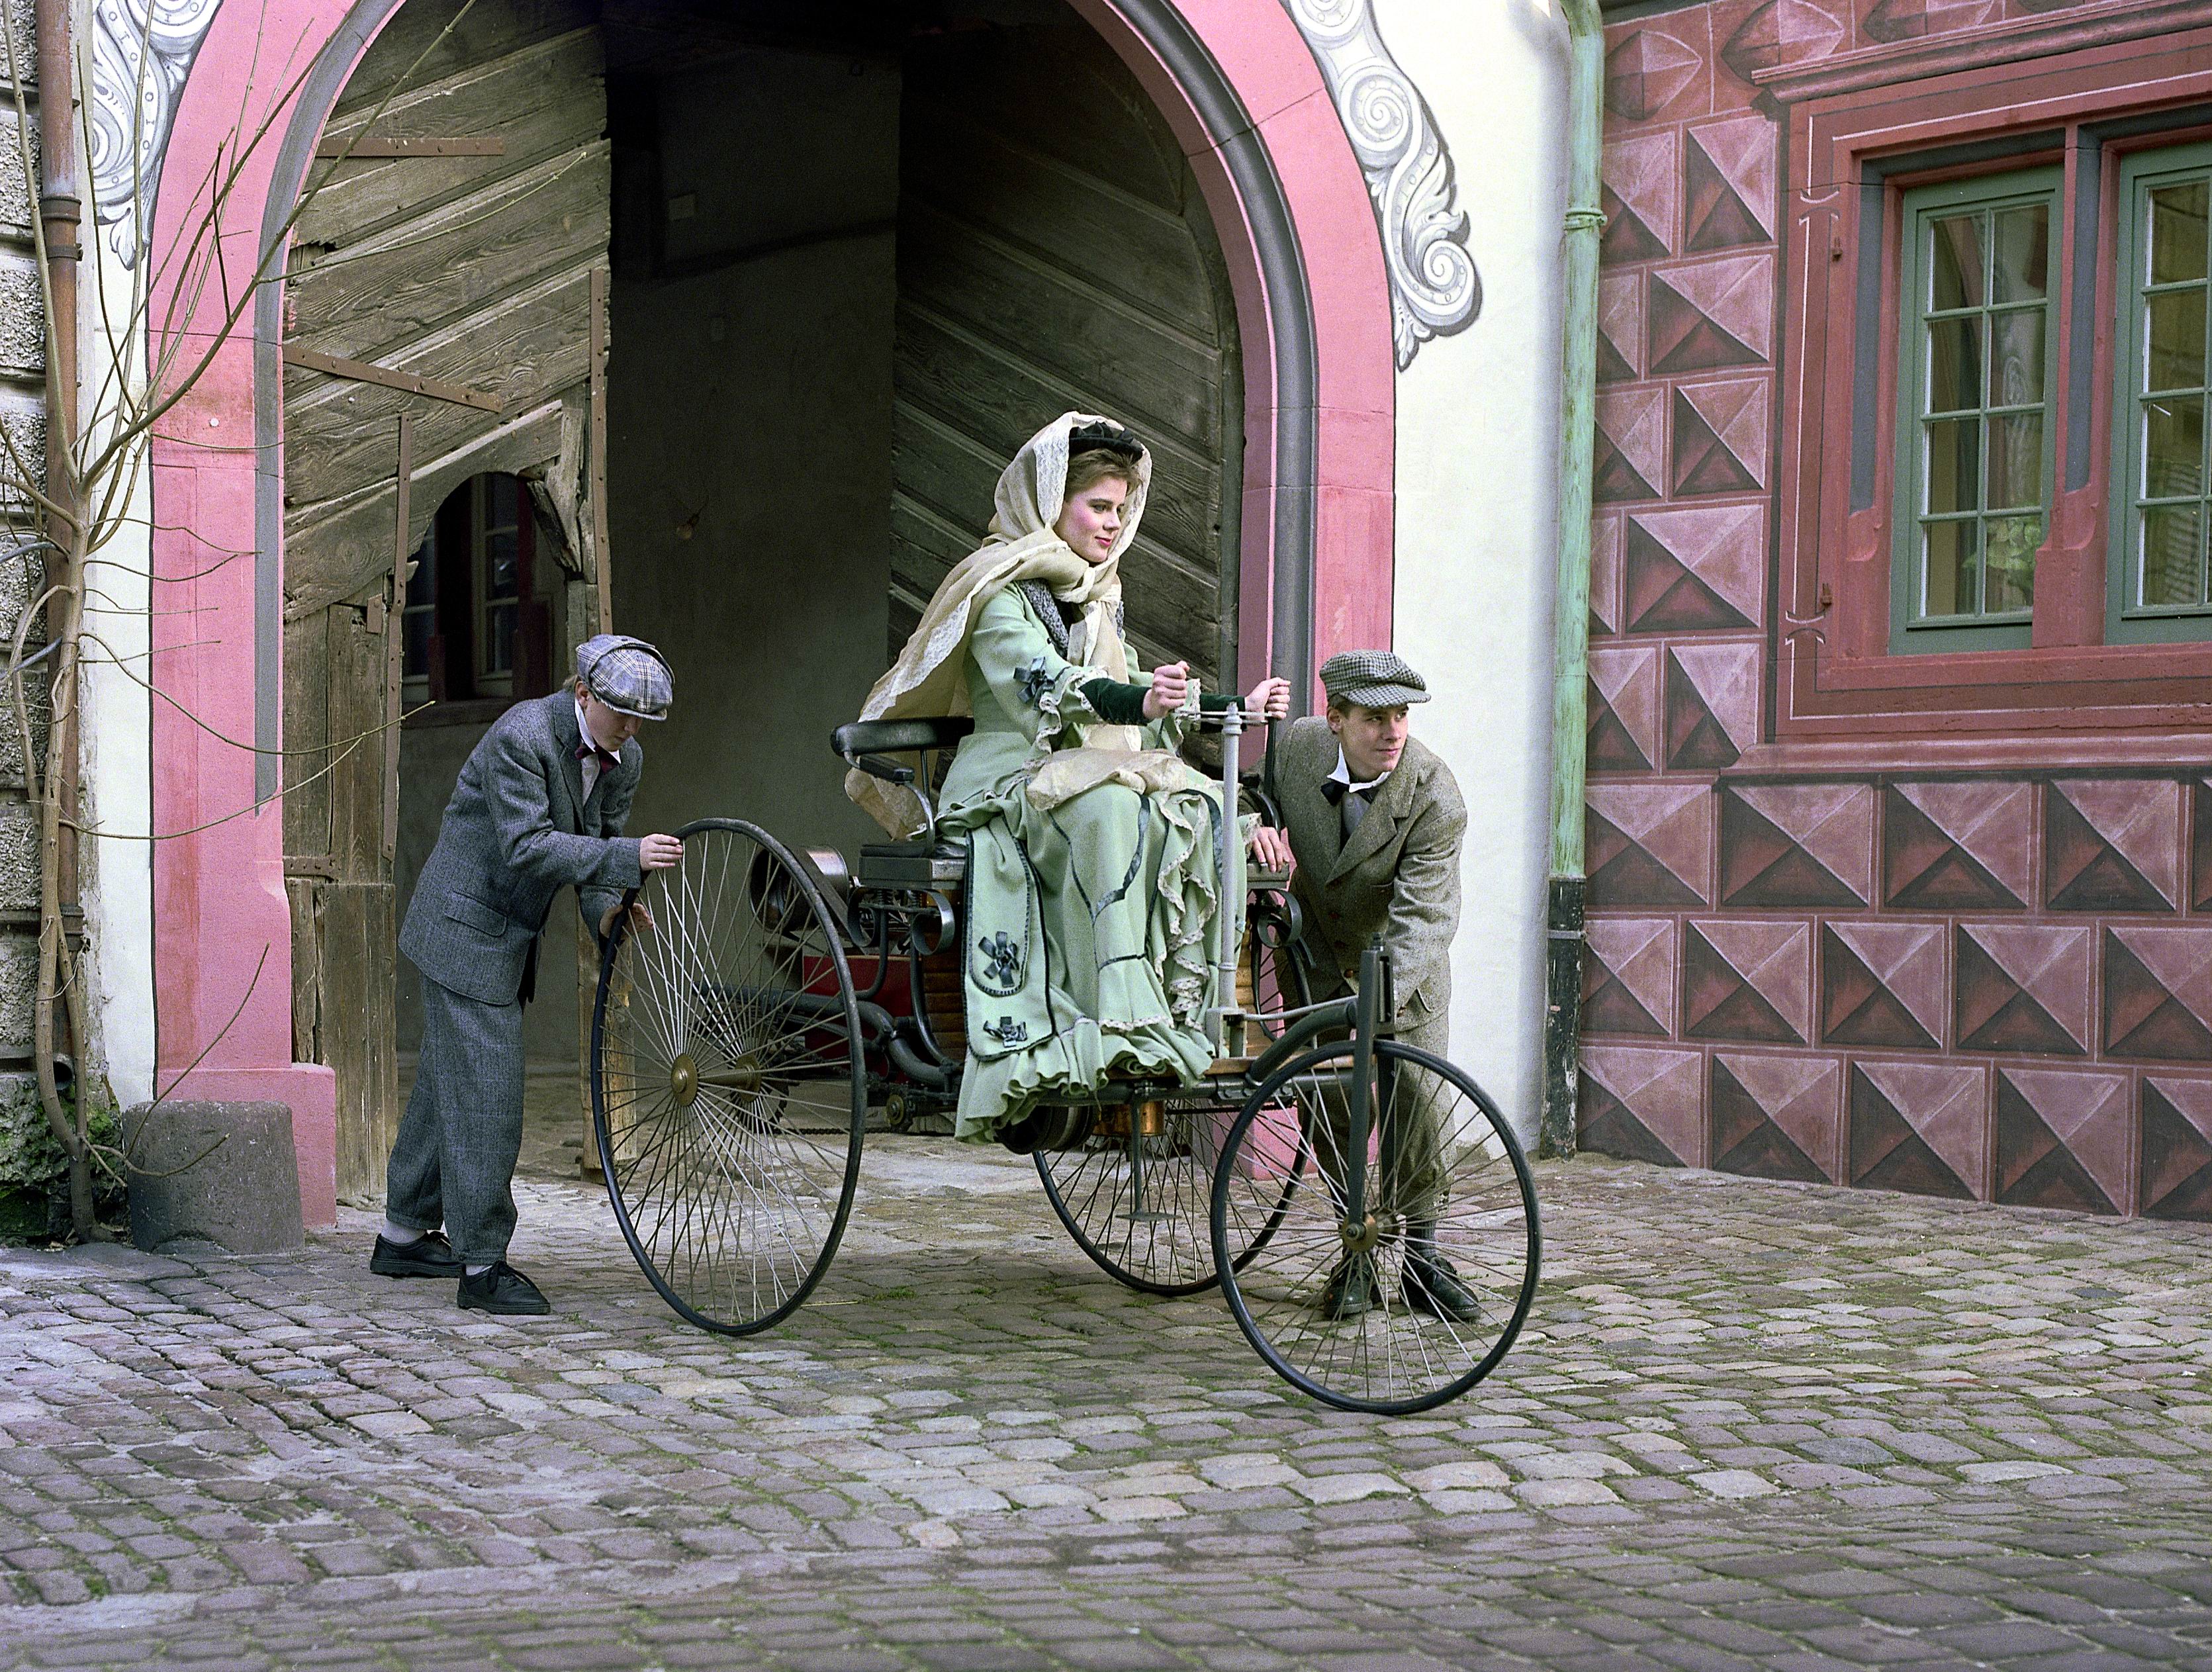 Bertha Benz with her sons Eugen and Richard during the long-distance journey from Mannheim to Pforzheim with the Benz Patent Motor Car in 1888. Reconstructed scene (push-starting the car) on celebrating the 100th anniversary of the motor vehicle’s first long-distance journey.